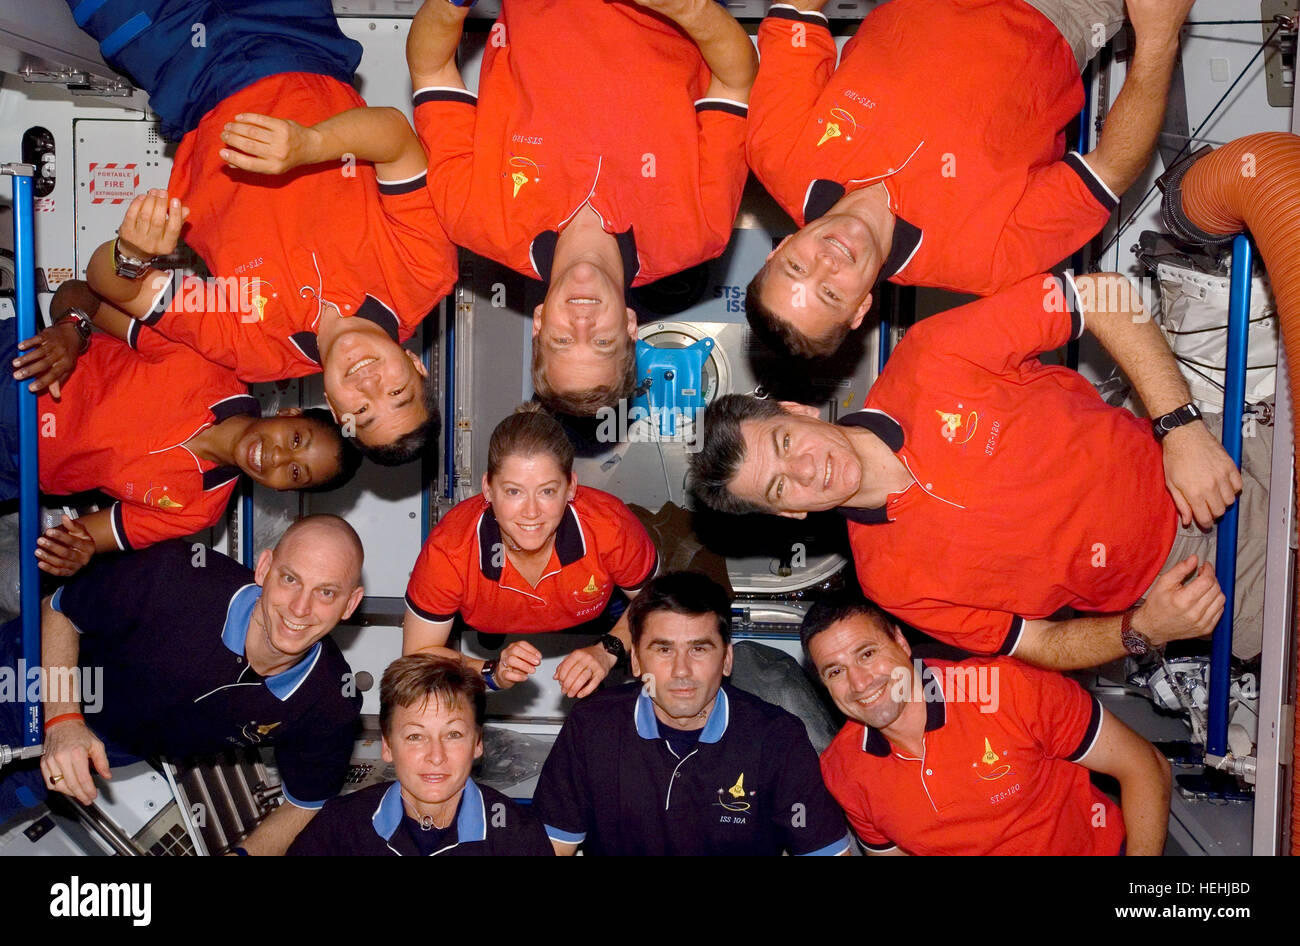 NASA STS-120 and Expedition 16 crew members astronauts (L-R) Peggy Whitson, Clayton Anderson, Stephanie Wilson, Daniel Tani, Scott Parazynski, Doug Wheelock, Italian astronaut Paolo Nespoli of the European Space Agency, George Zamka, Russian cosmonaut Yuri Malenchenko of Roscosmos, and Pam Melroy (center) put their heads in the center for a photo after a news conference in the International Space Station Harmony node while the space shuttle Discovery is docked with the station July 8, 2009 in Earth orbit. Stock Photo